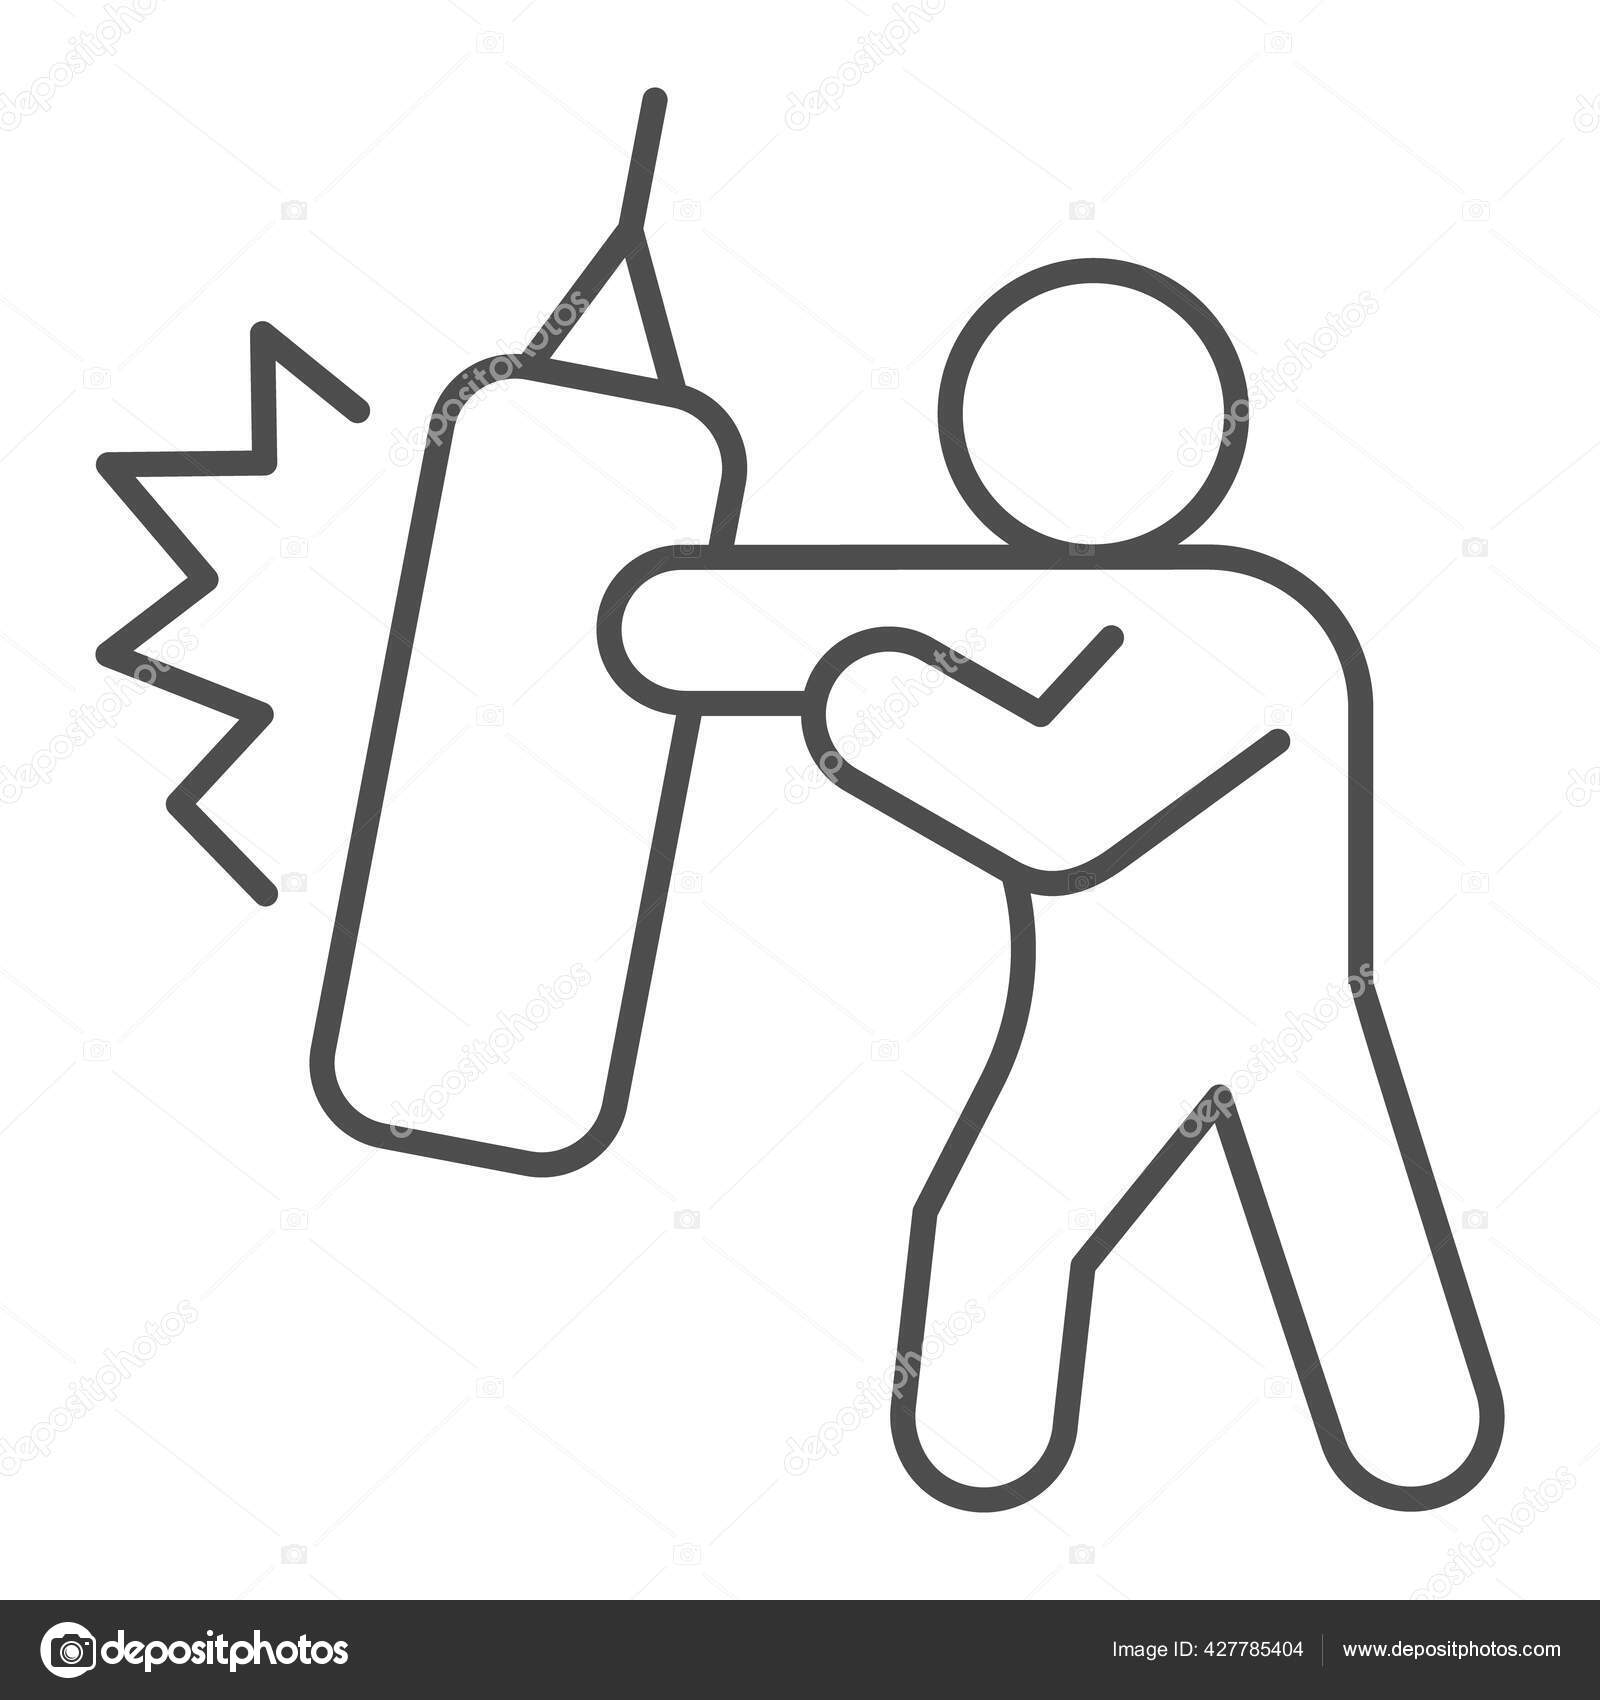 Stick figure with boxing gloves, hand drawn icon of punching